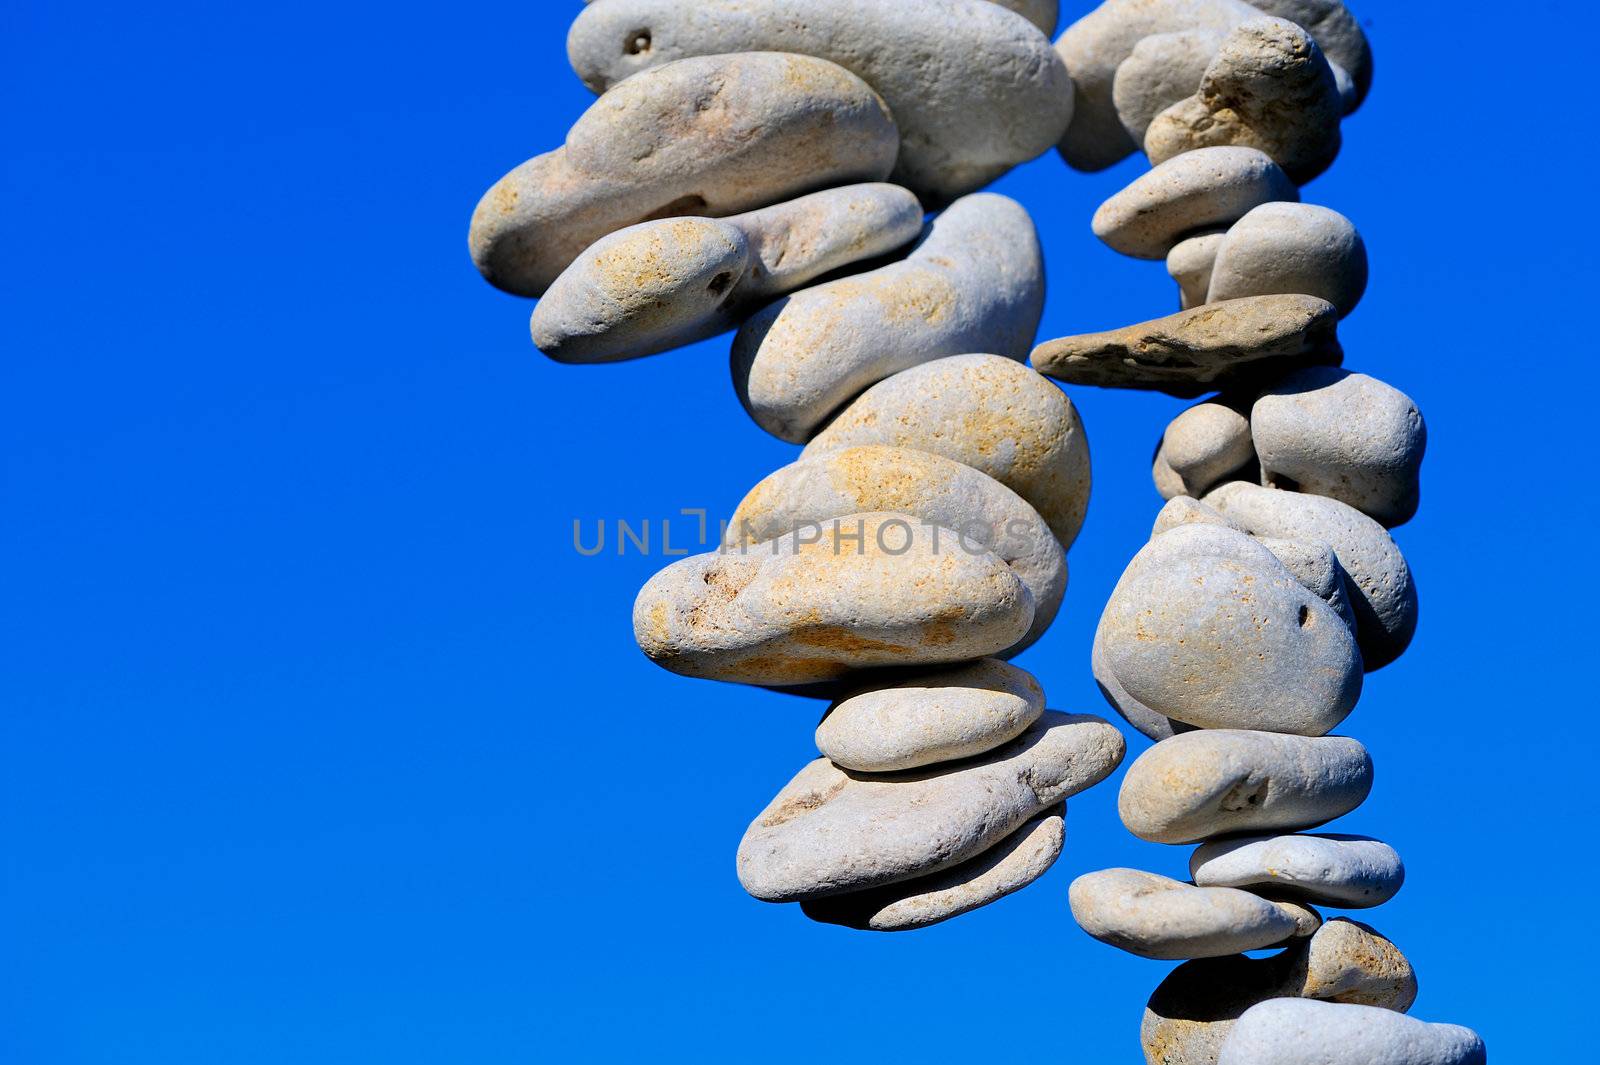 Sea pebbles hanging in the air of a blue sky